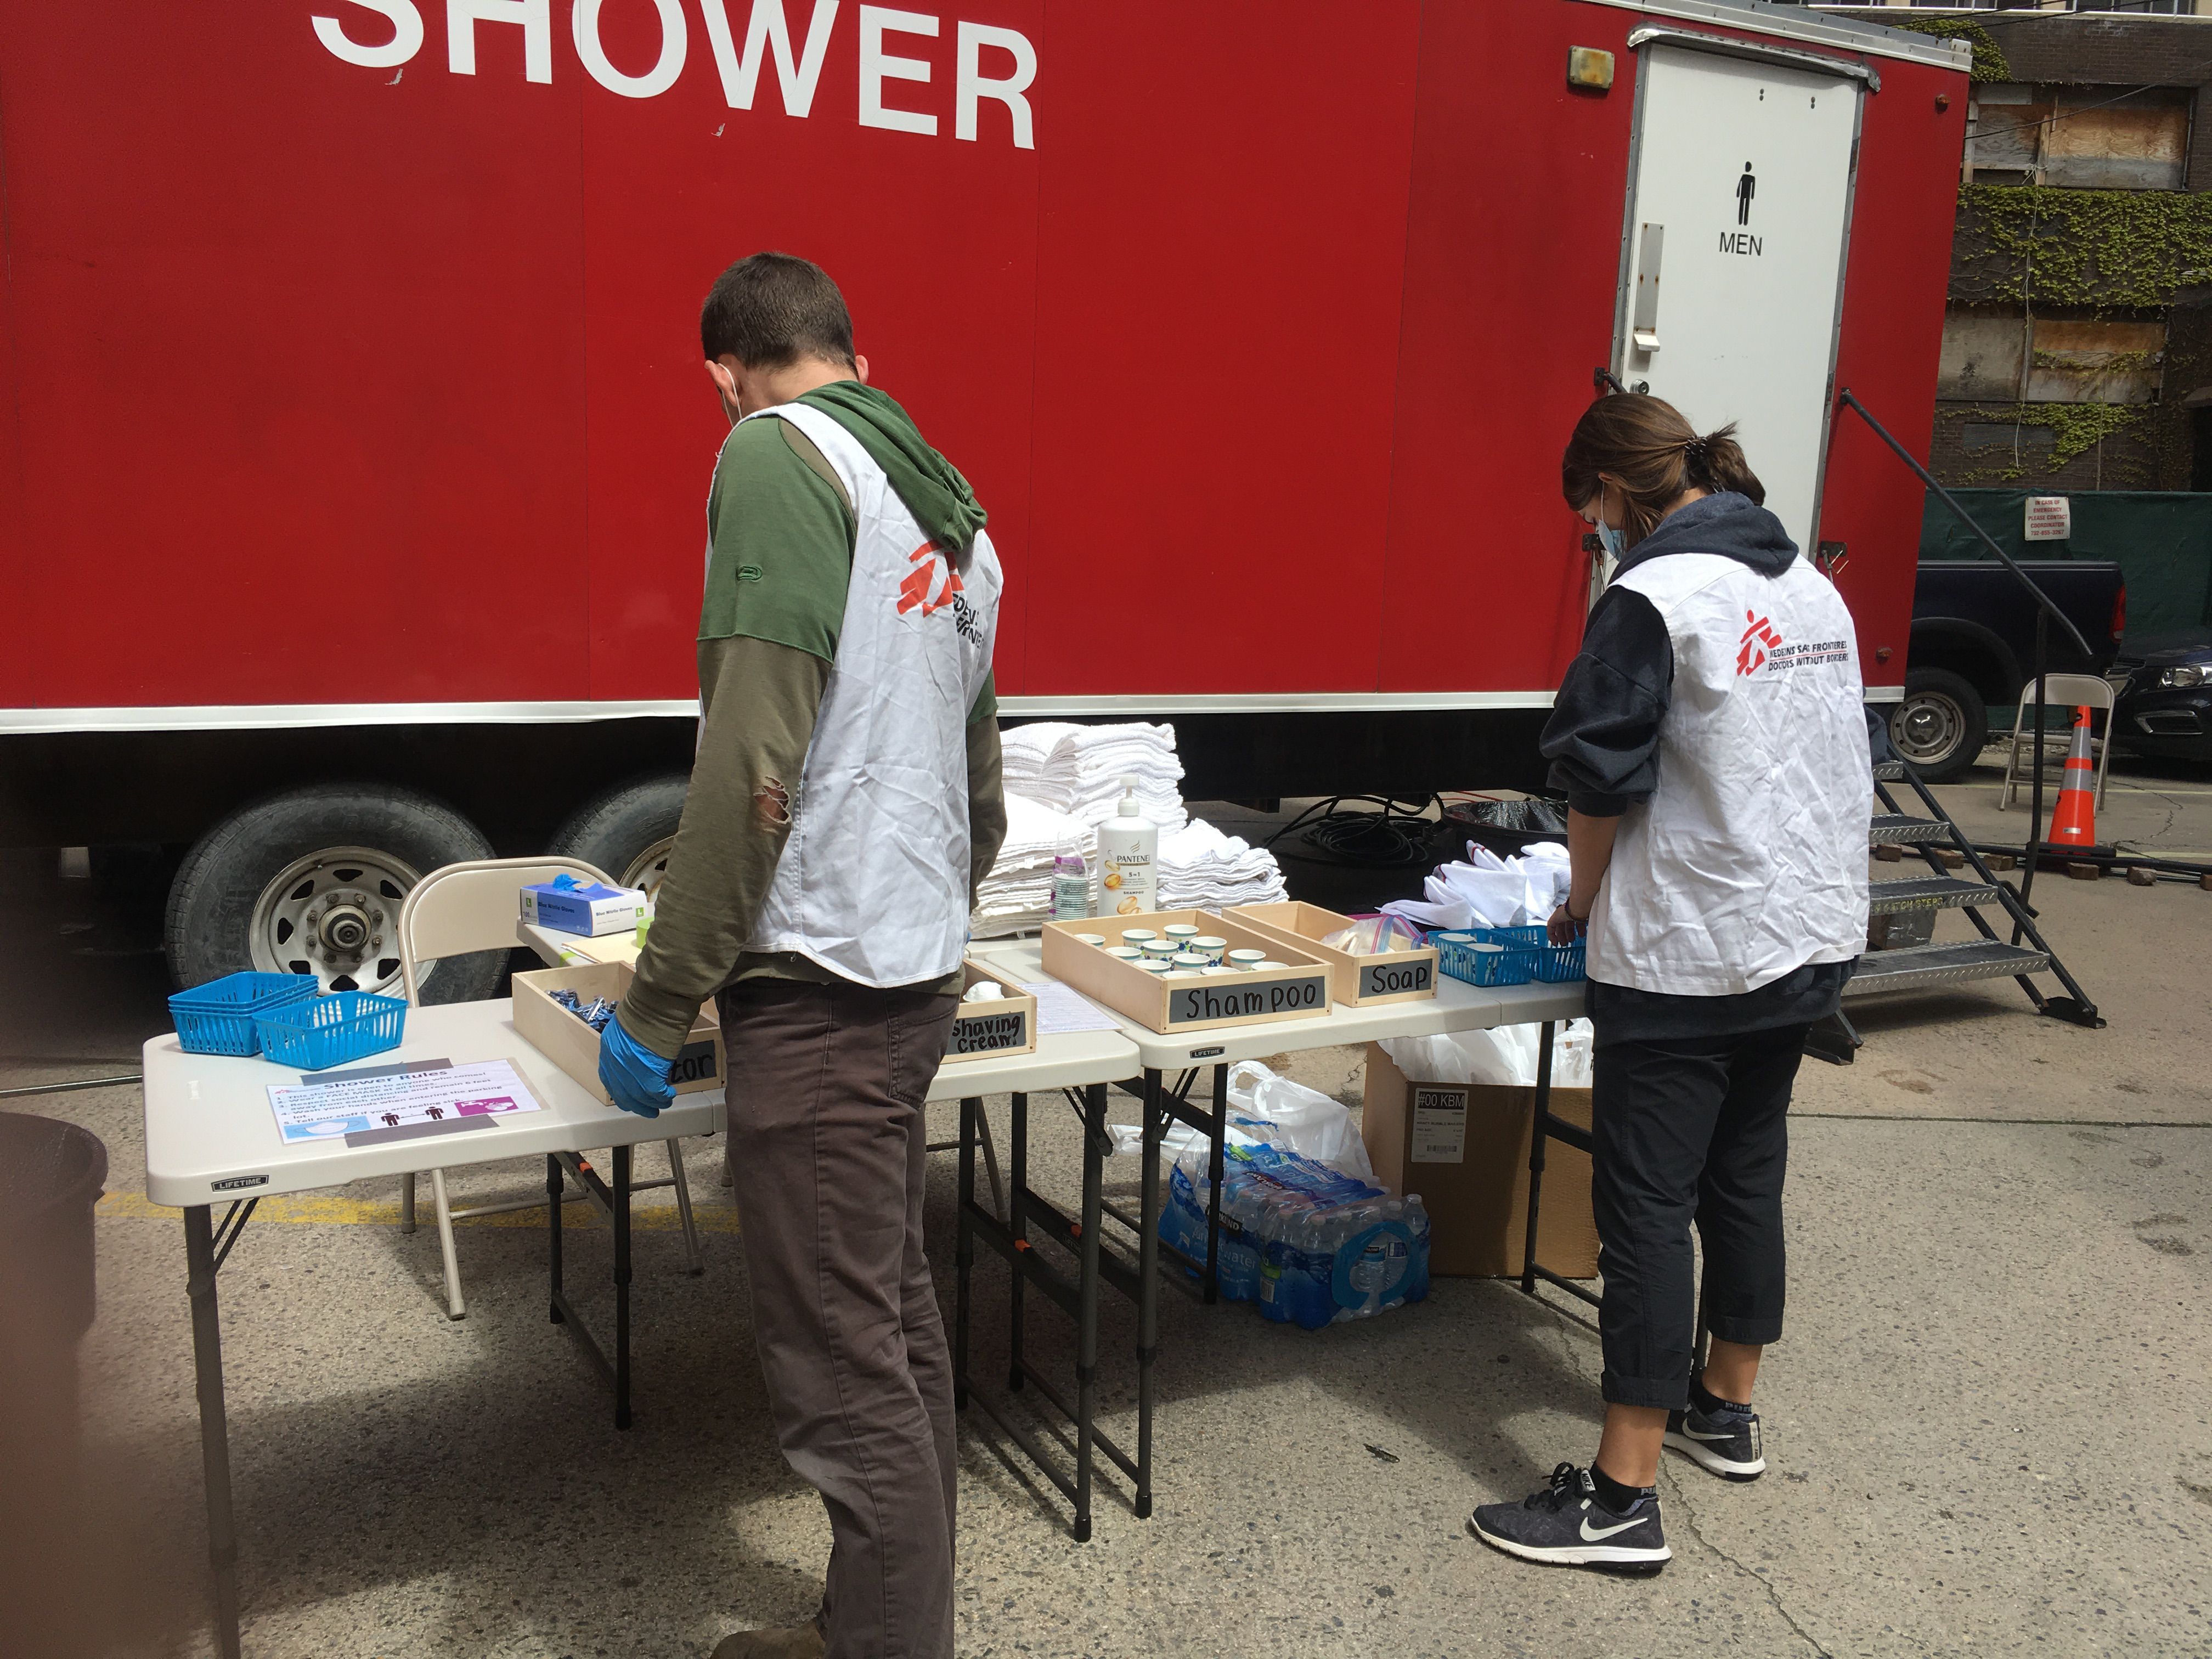 A mobile shower station in New York City. Coalition for the Homeless' Nortz said the nonprofit would not have been able to set up the showers without MSF's help. 